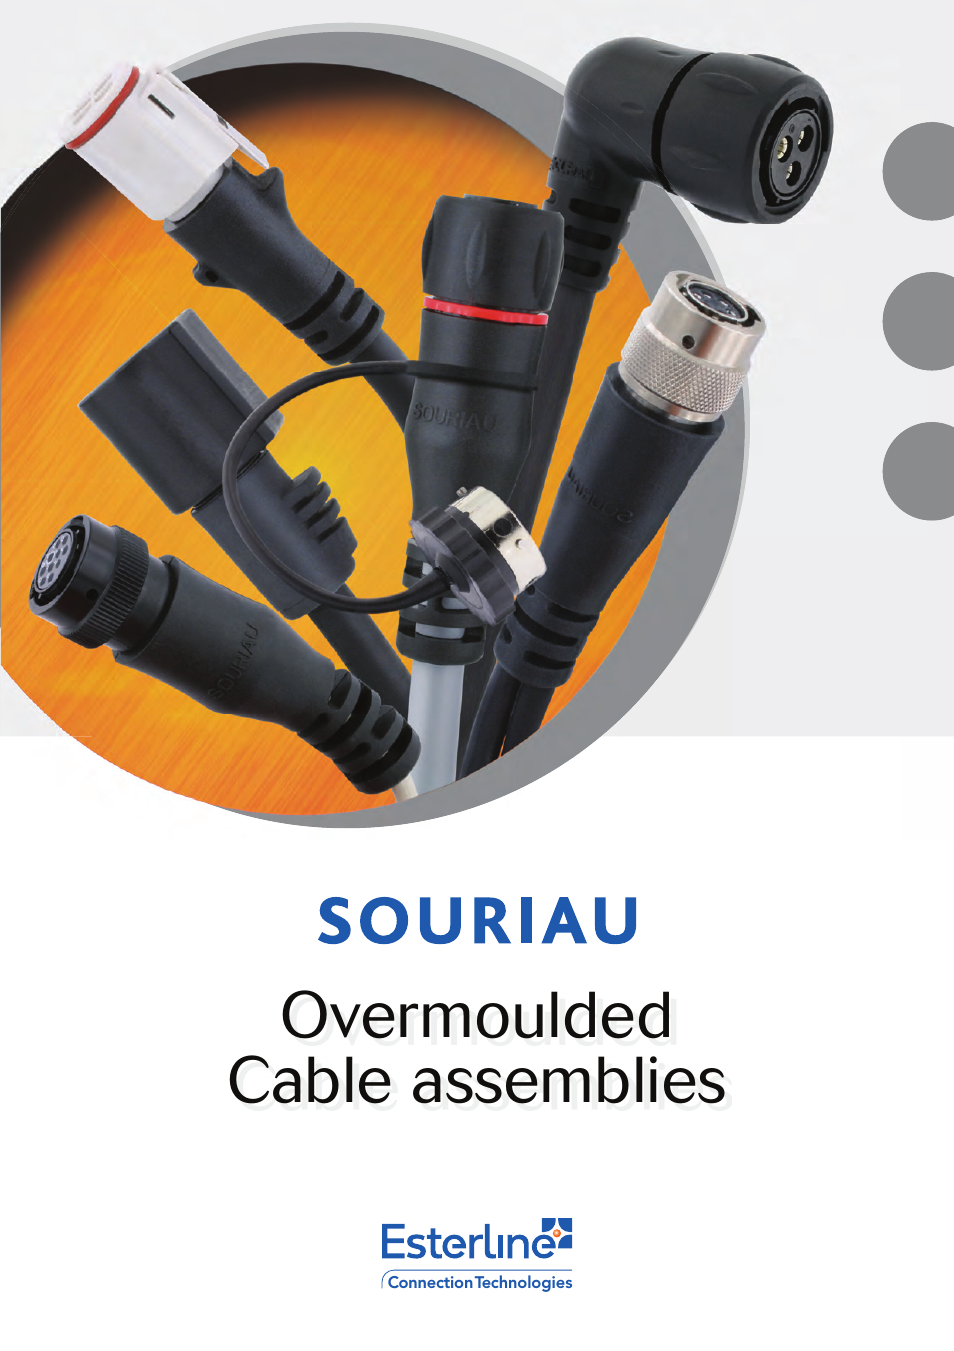 Souriau Overmoulded Cable Assemblies